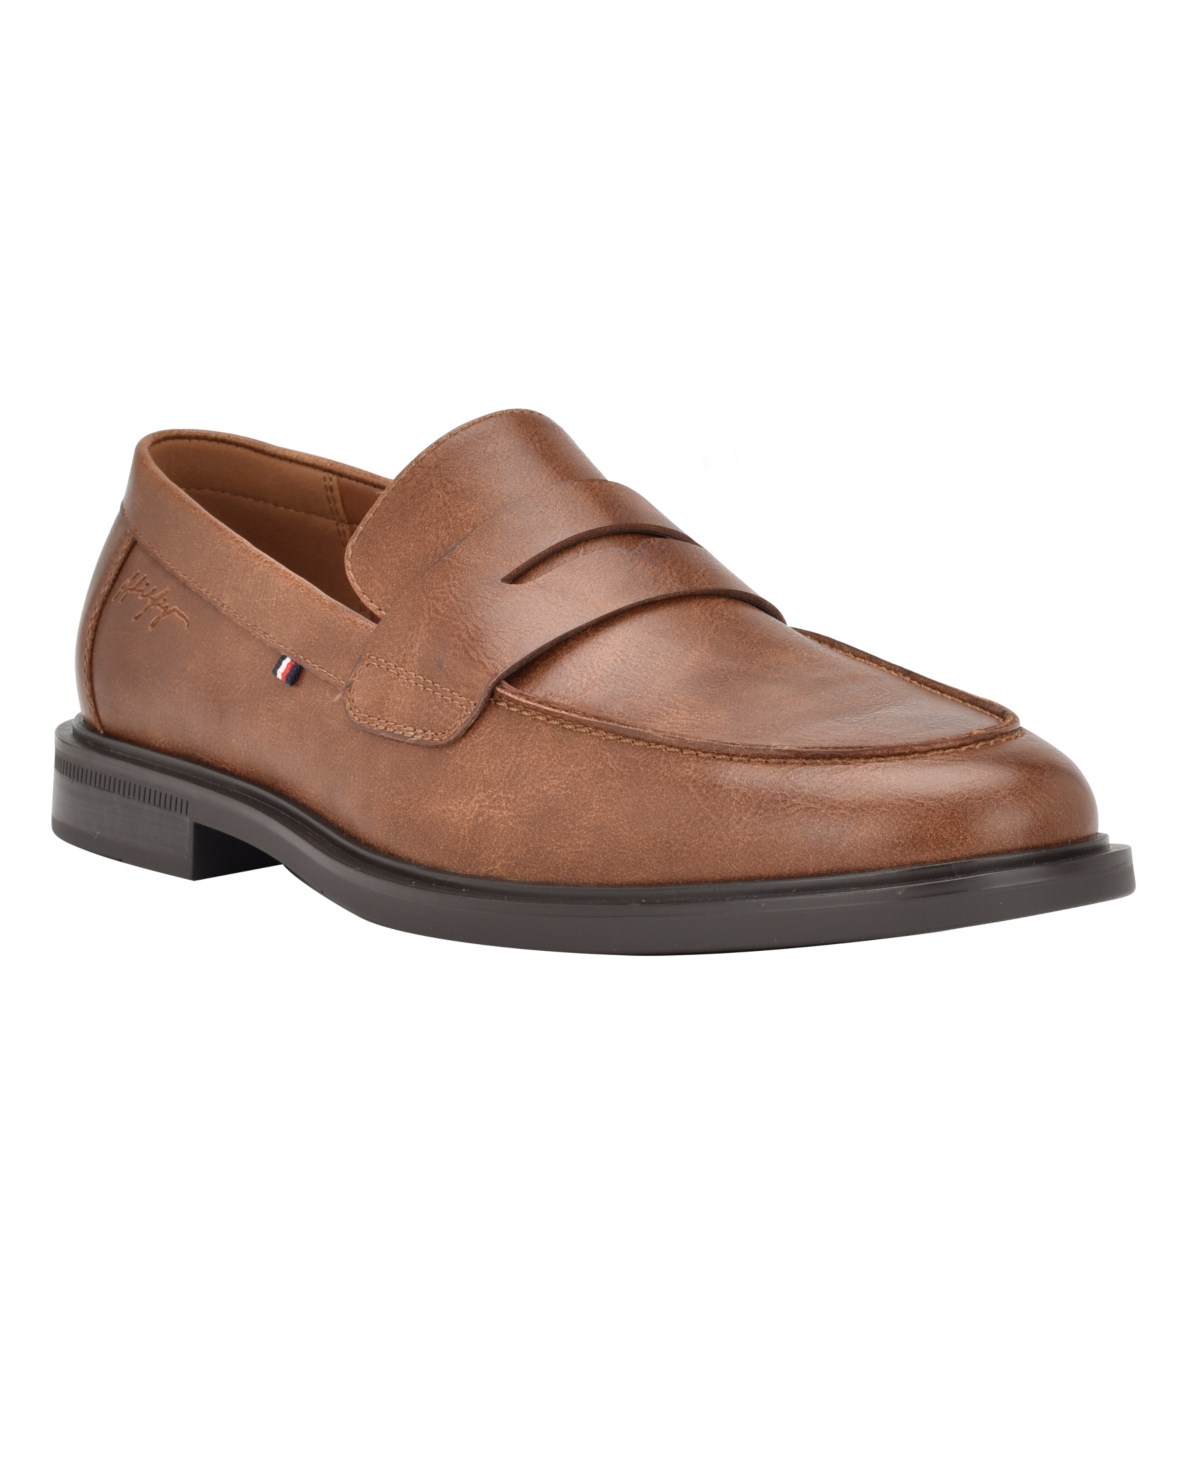 Tommy Hilfiger Shoes for Men - Shop Now on FARFETCH